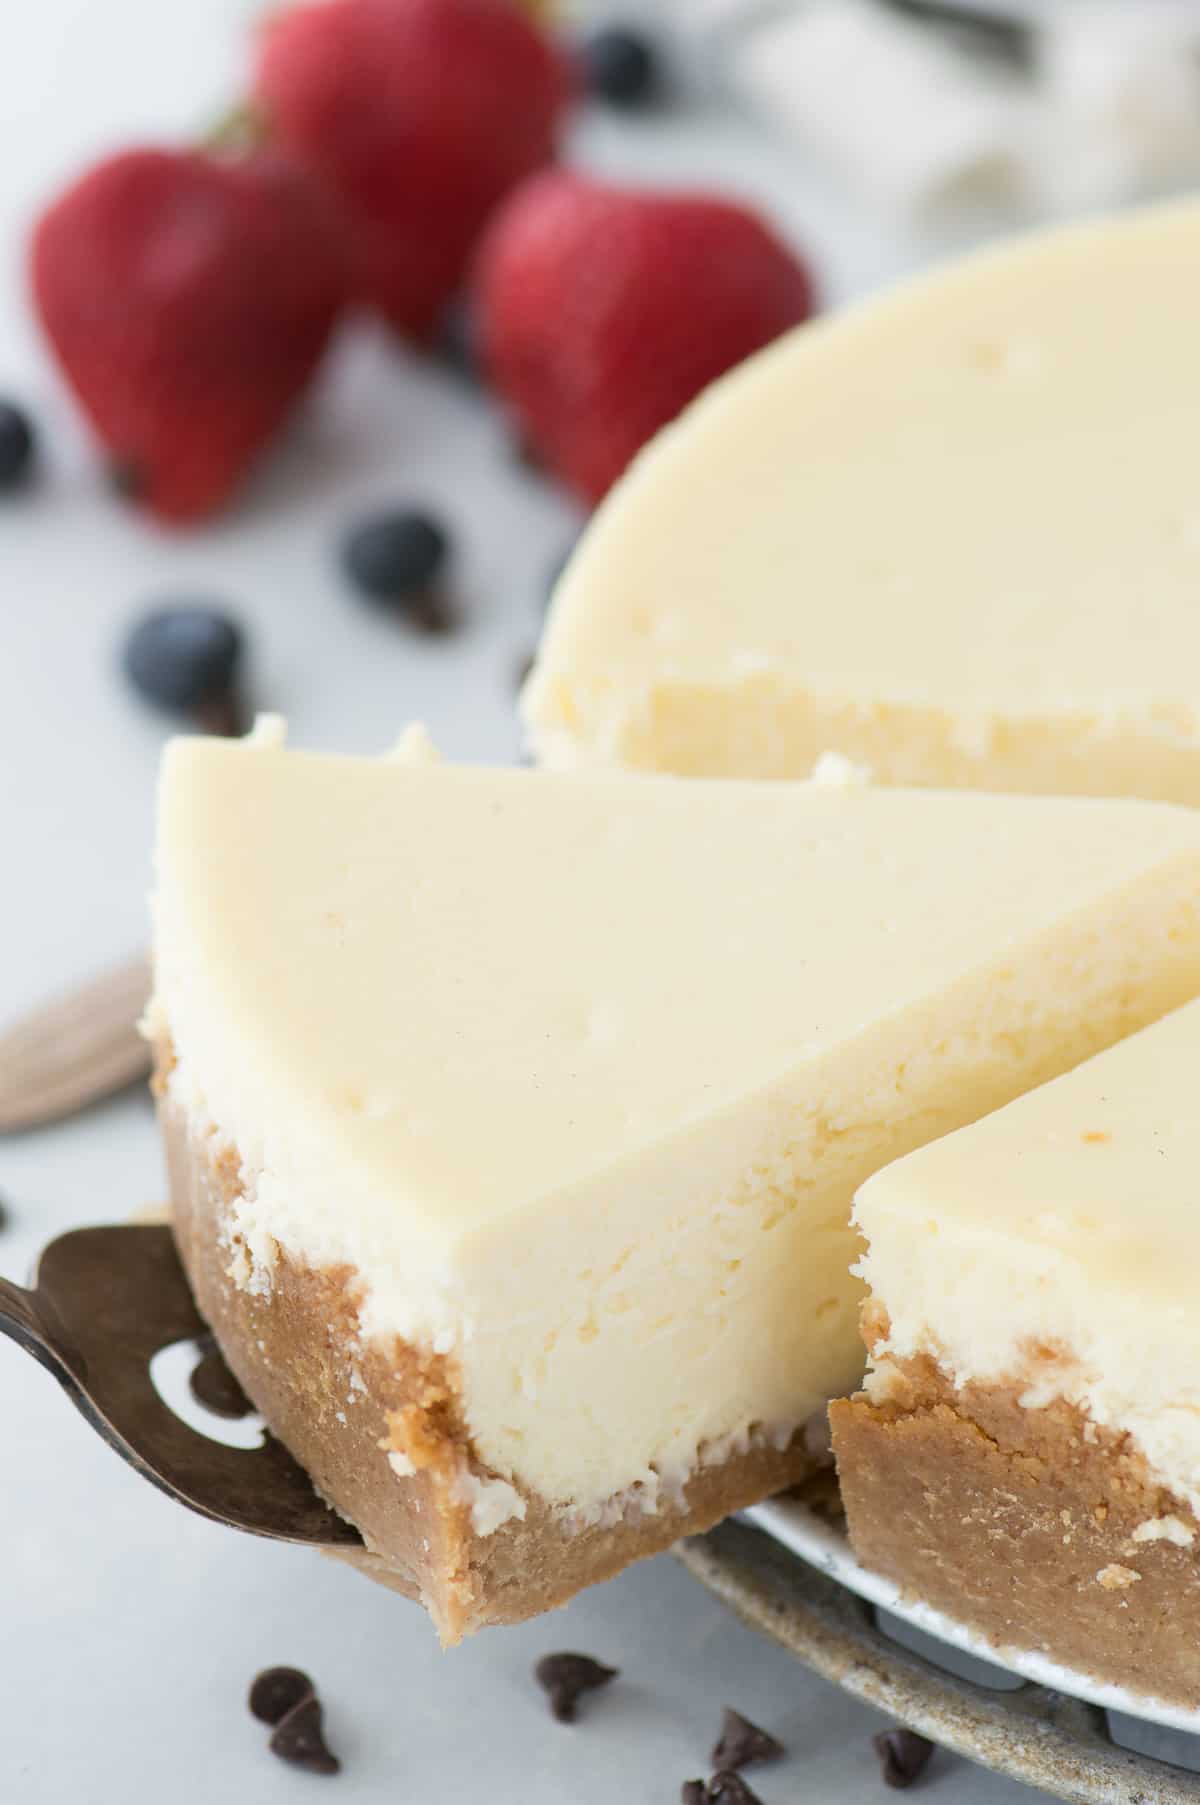 slice of classic plain cheesecake being removed from whole cheesecake